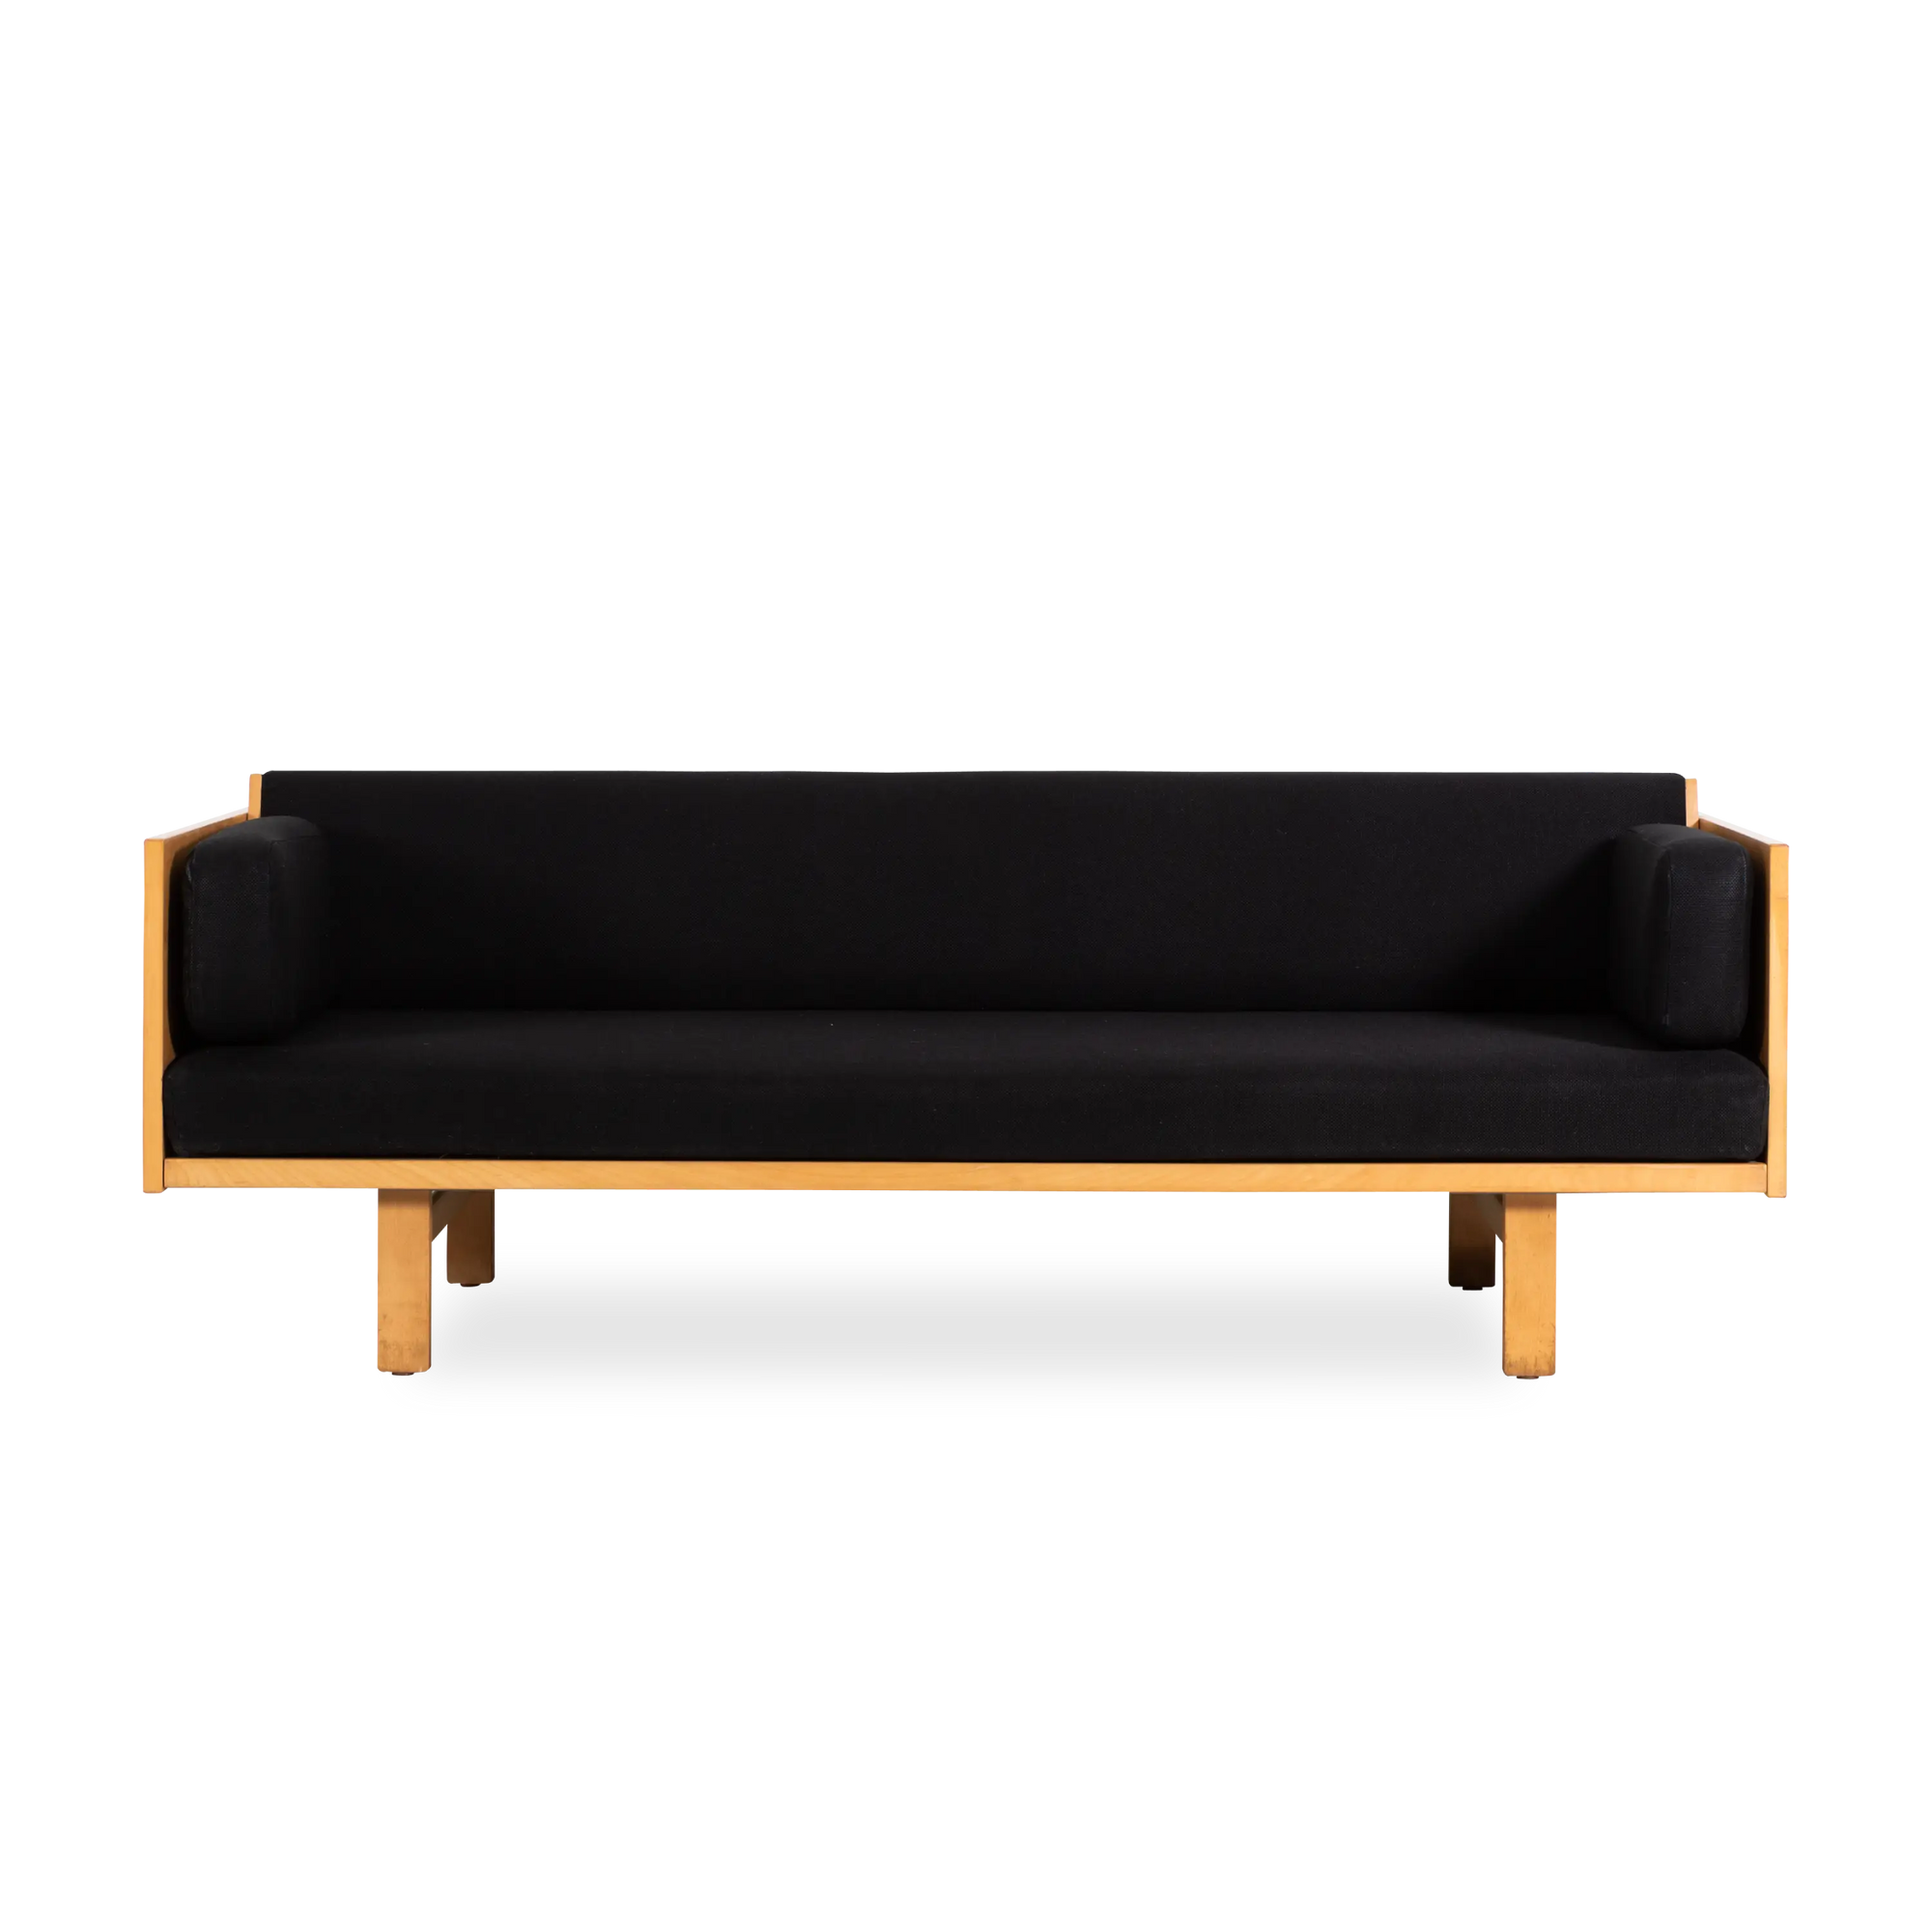 Originally made for use in dormitory rooms, this vintage GE-259 Sofa Bed was designed by Hans Wegner and manufactured by GETAMA , circa 1950s.